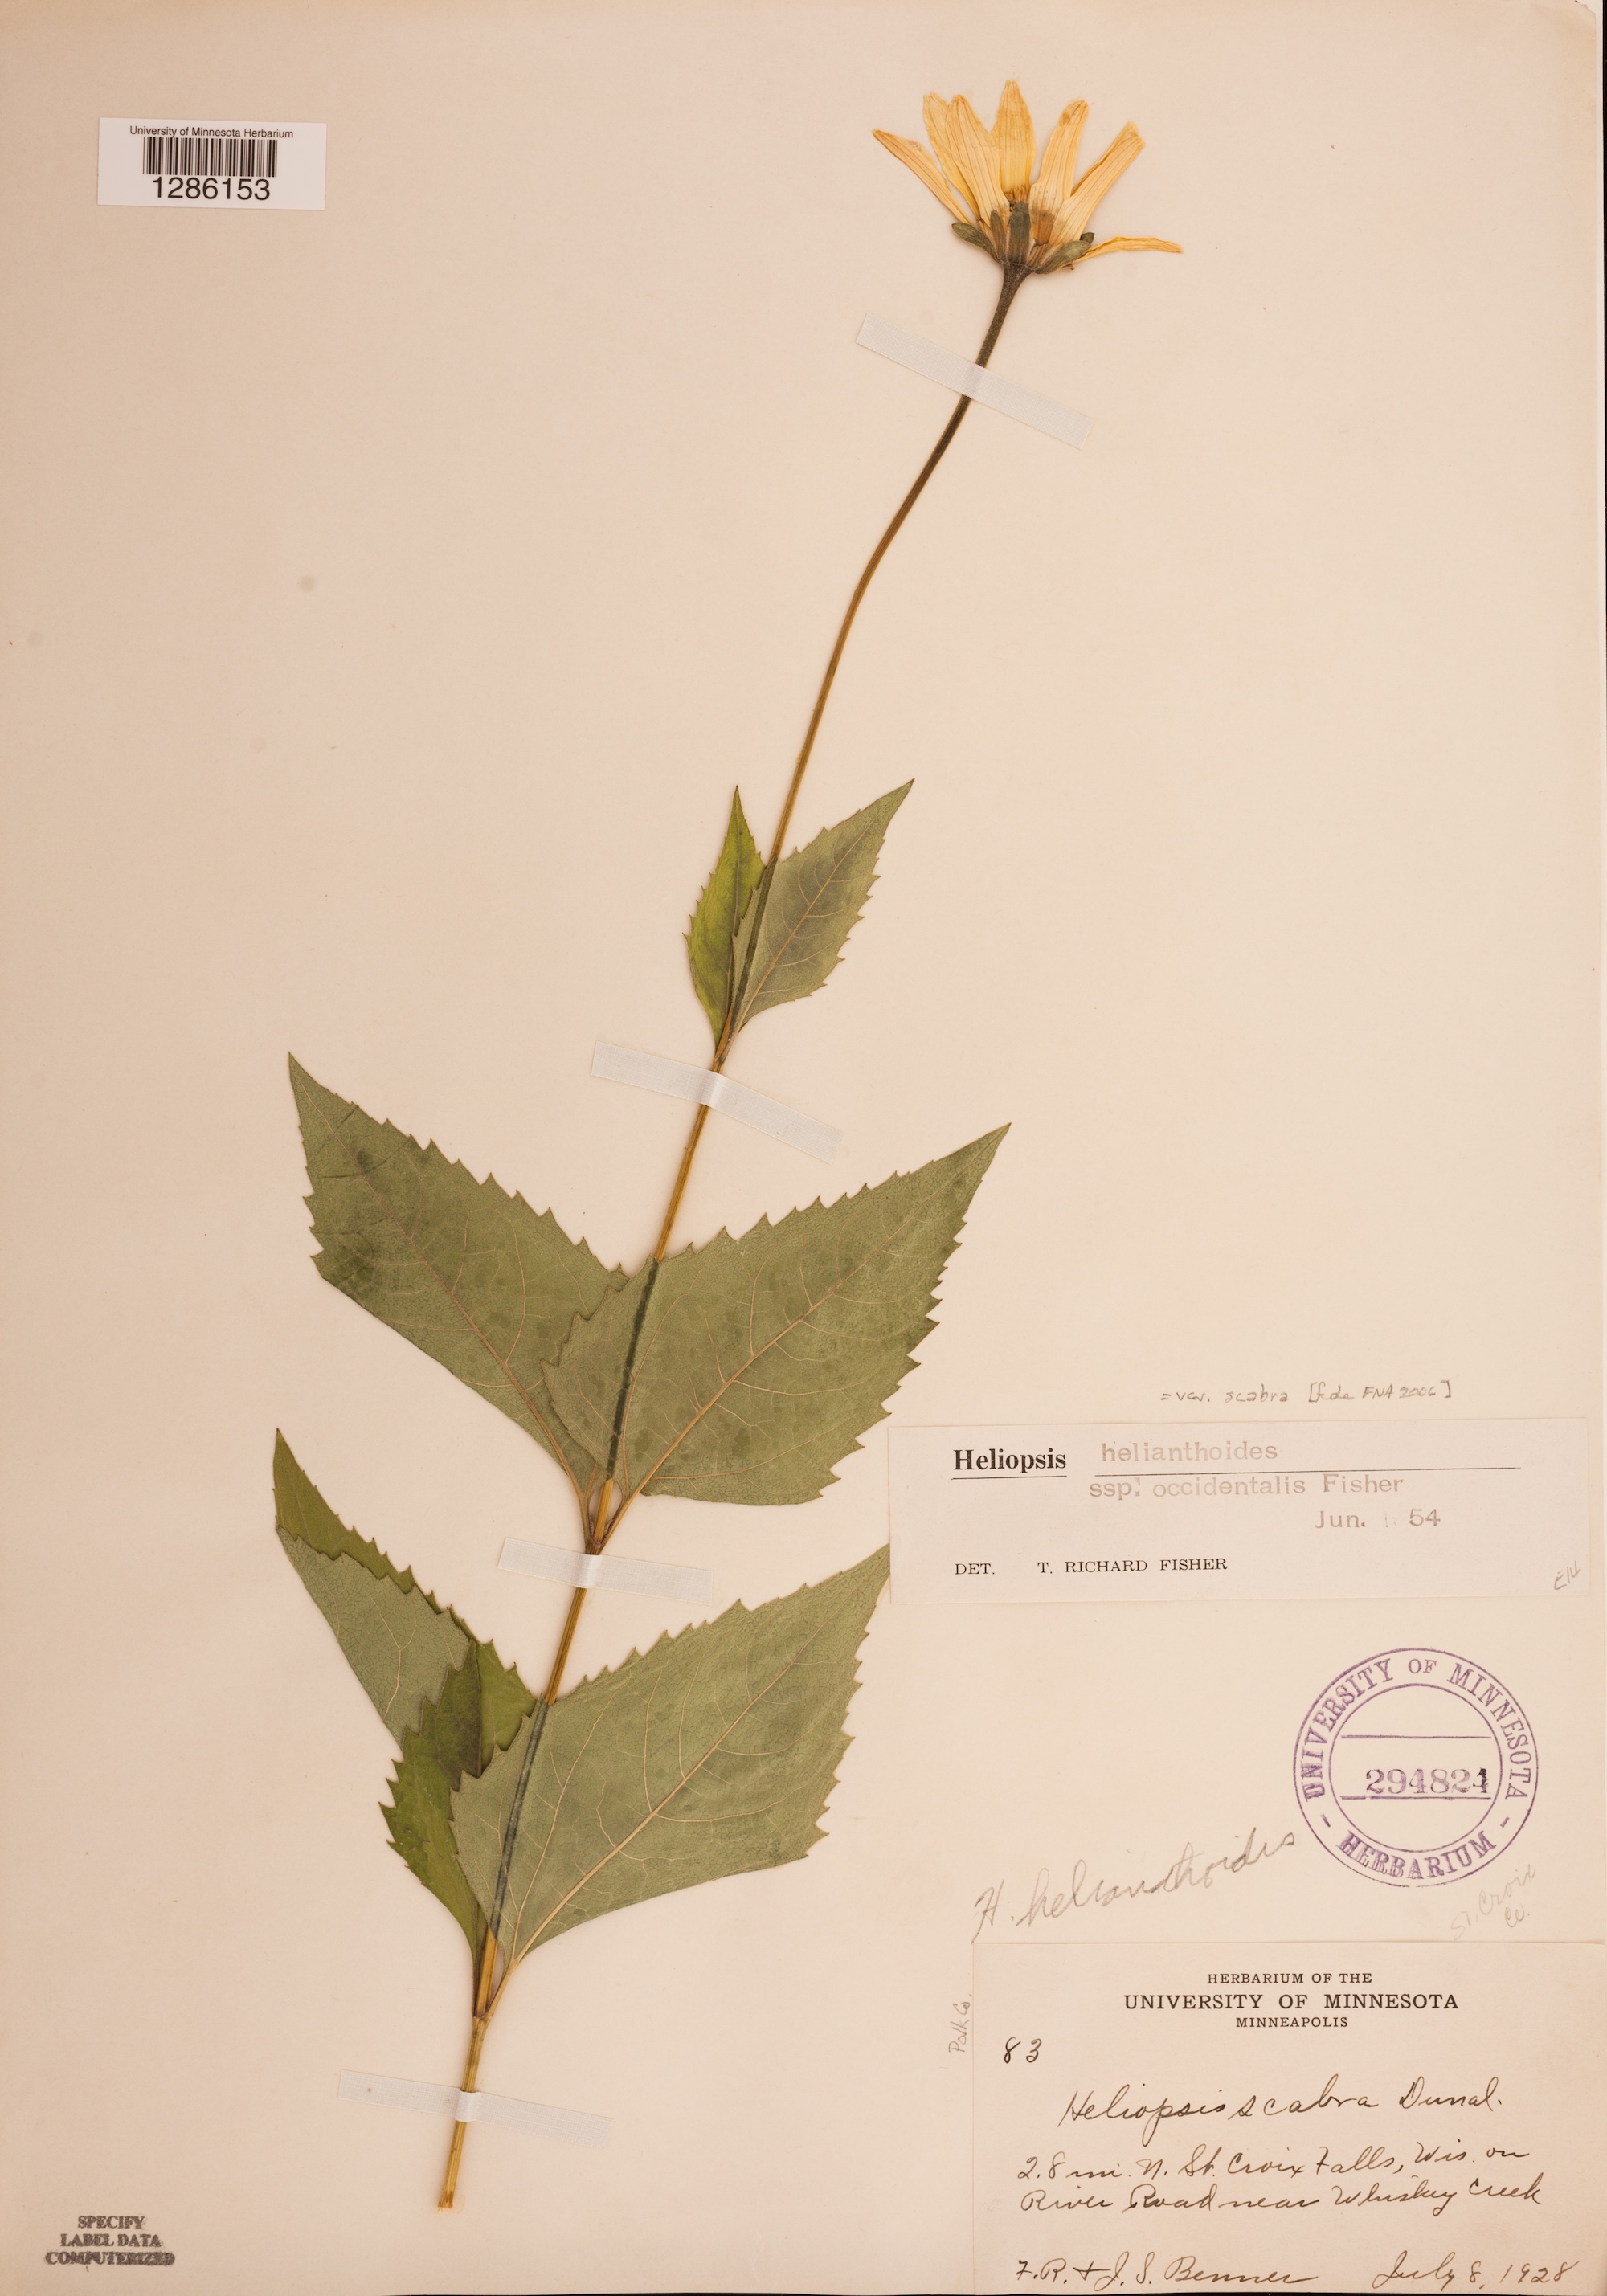 False Sunflower specimen collected 2.8 miles from St. Croix Falls, Wisconsin on July 8, 1928.